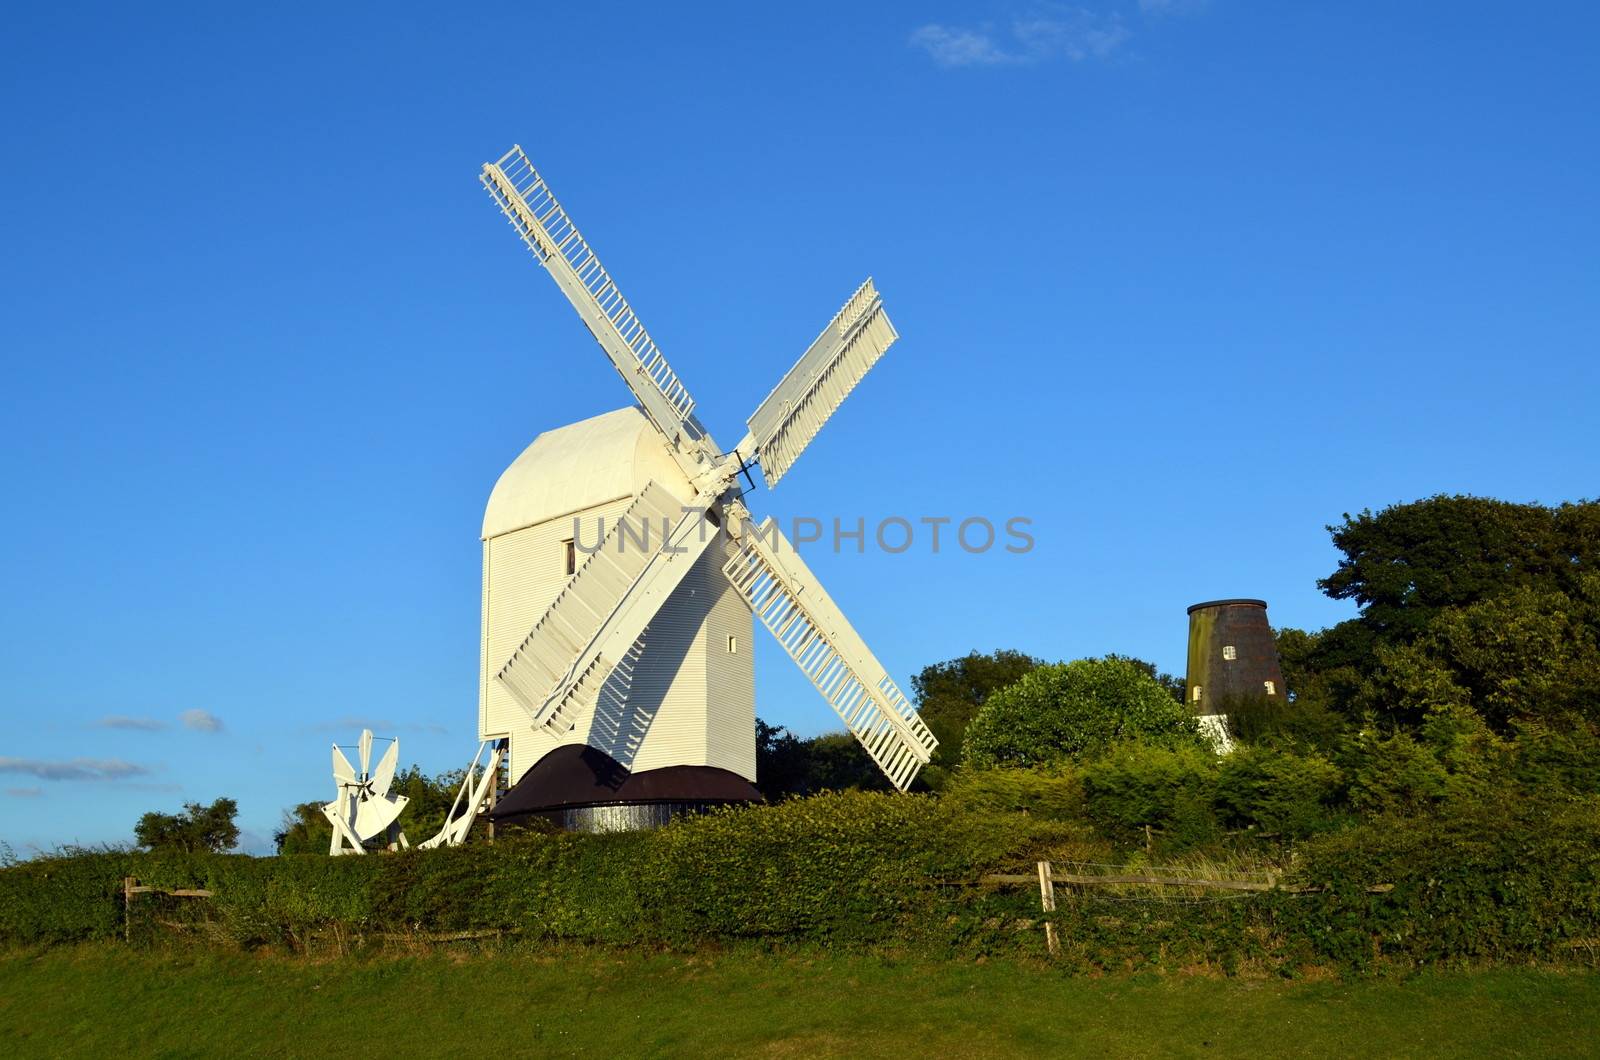 Sussex windmills on Clayton Hill,Sussex,England.Named affectionately as Jack & Jill, Jill being the fully restored working corn mill built in 1821.Jack was built in 1866 and is being retored as of 2013.